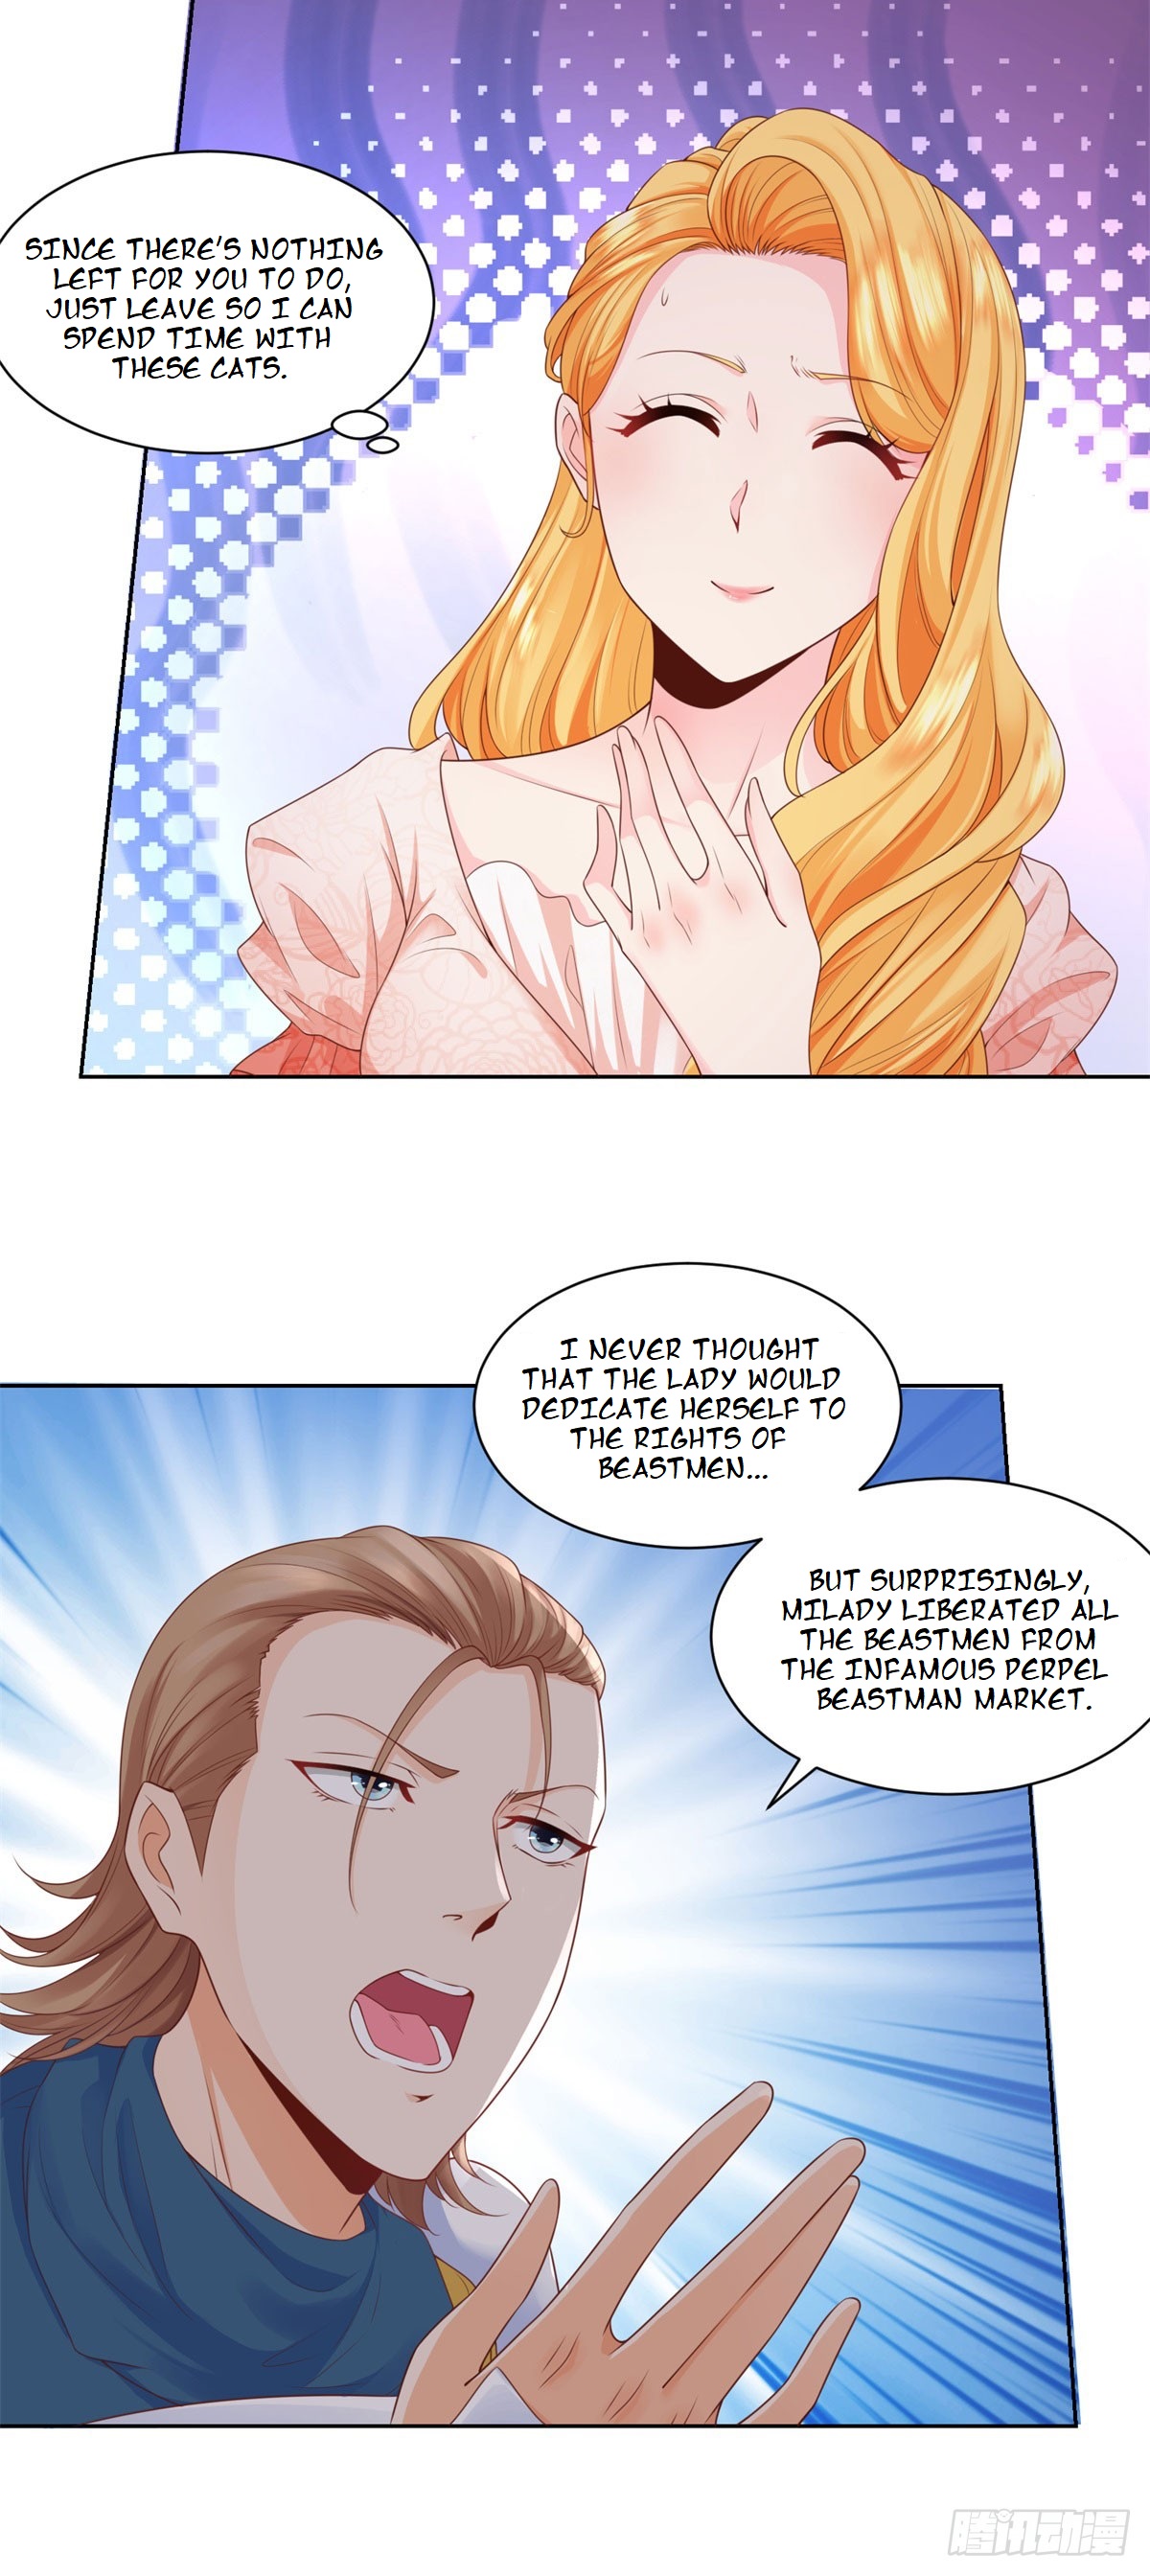 I Just Want to Be a Useless Duke's Daughter Vol. 1 Ch. 6